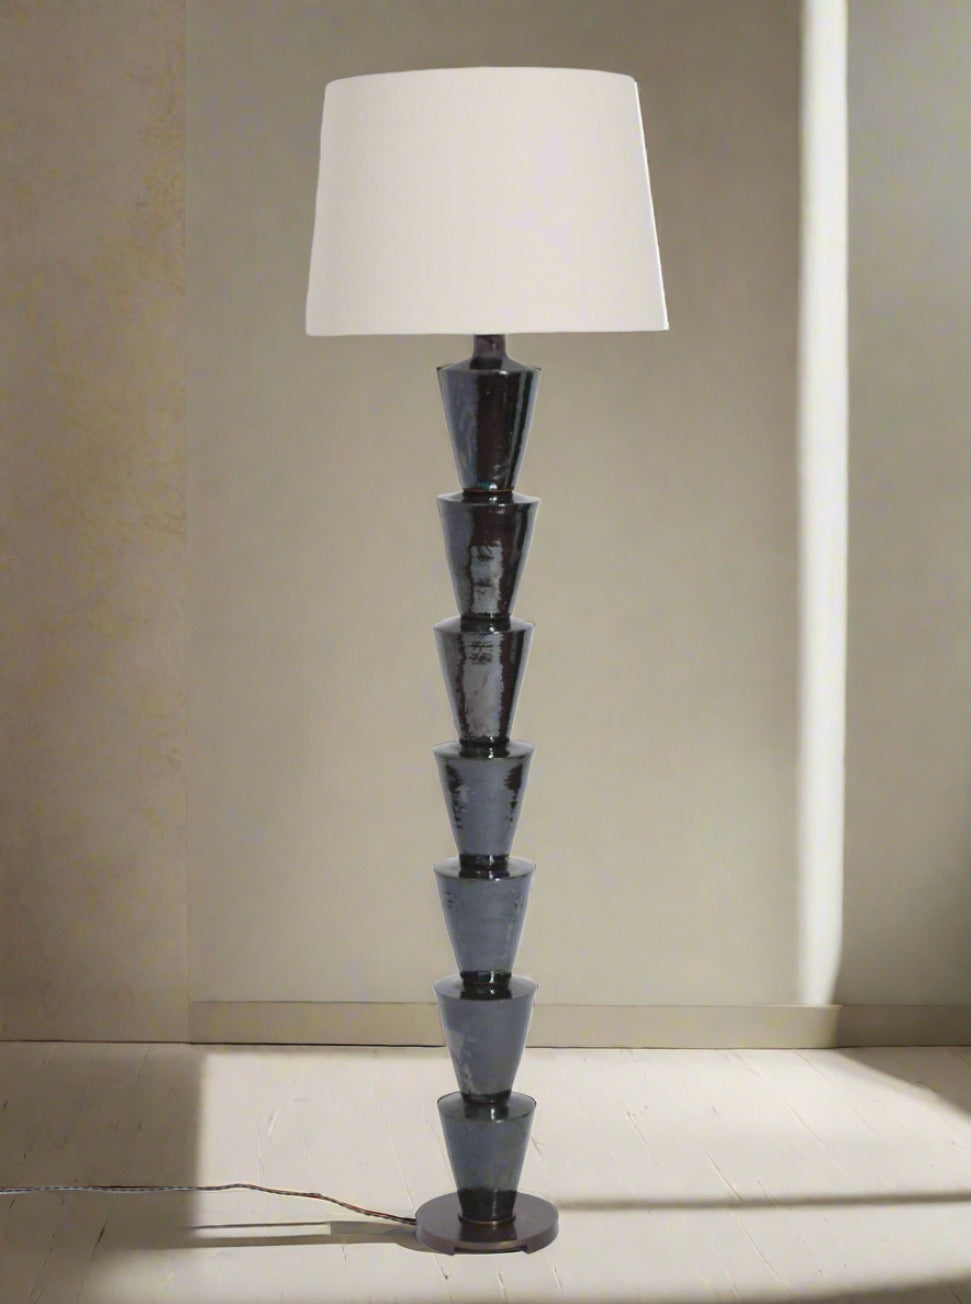 A tall glazed "Nizwa" Floor Lamp by Barracuda Interiors with a white lampshade and a black, sculptural base composed of several stacked, inverted cone shapes. The lamp is set against a neutral background with a visible power cord on the floor.